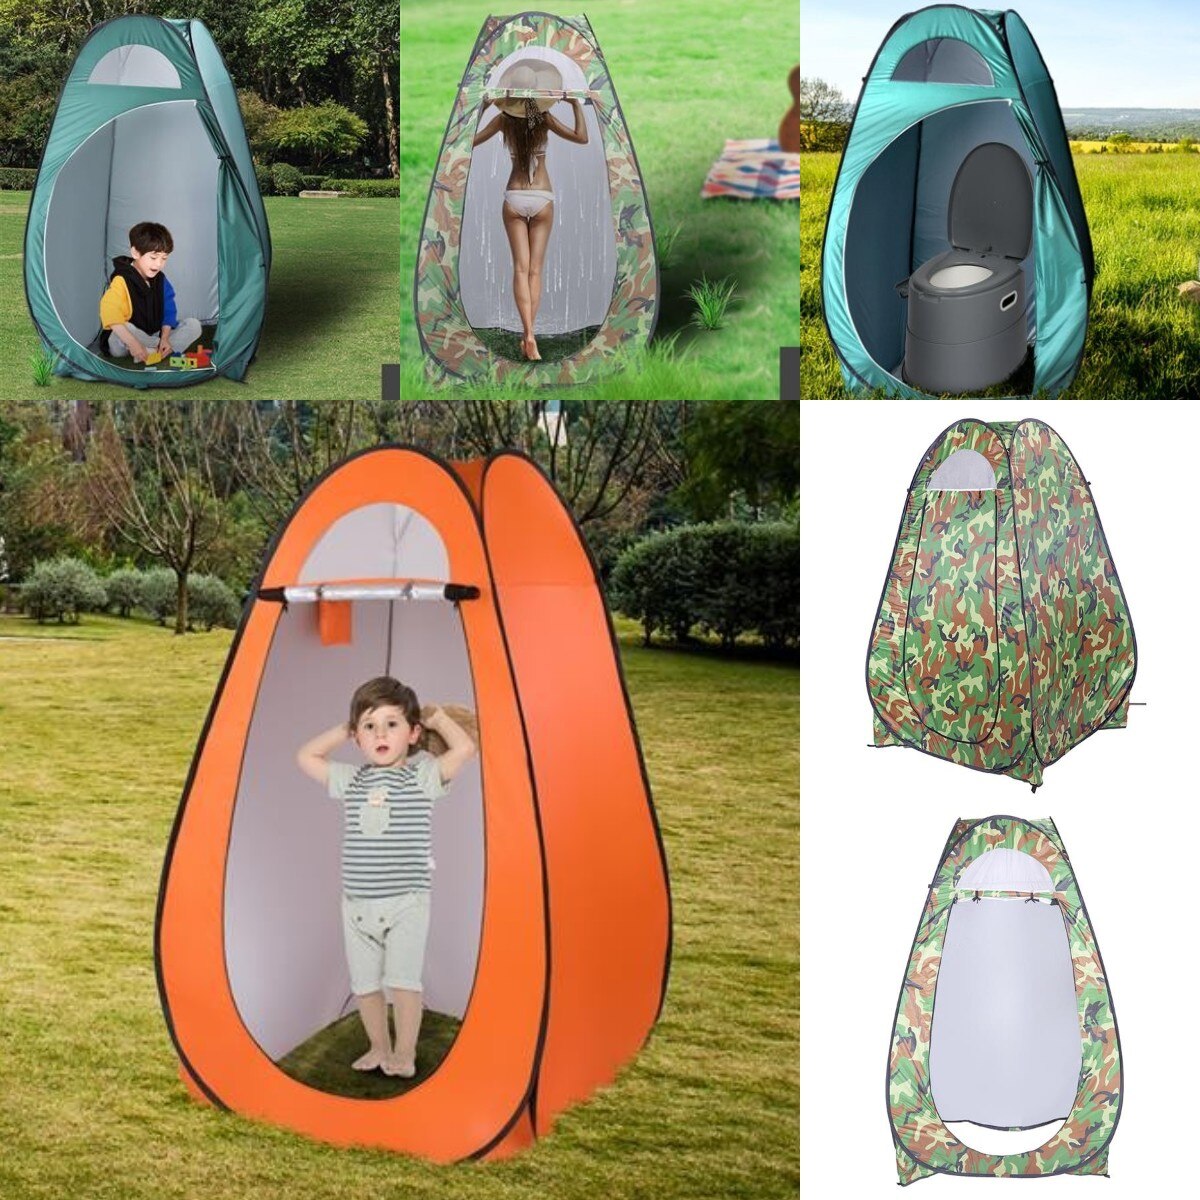 Goorabbit Shower Tents For Camping Pop-Up Privacy TentPortable Shower Tent Outdoor Camp Bathroom Changing Dressing Room Instant Privacy Shelters for Hiking Beach Picnic Fishing Potty - image 1 of 11